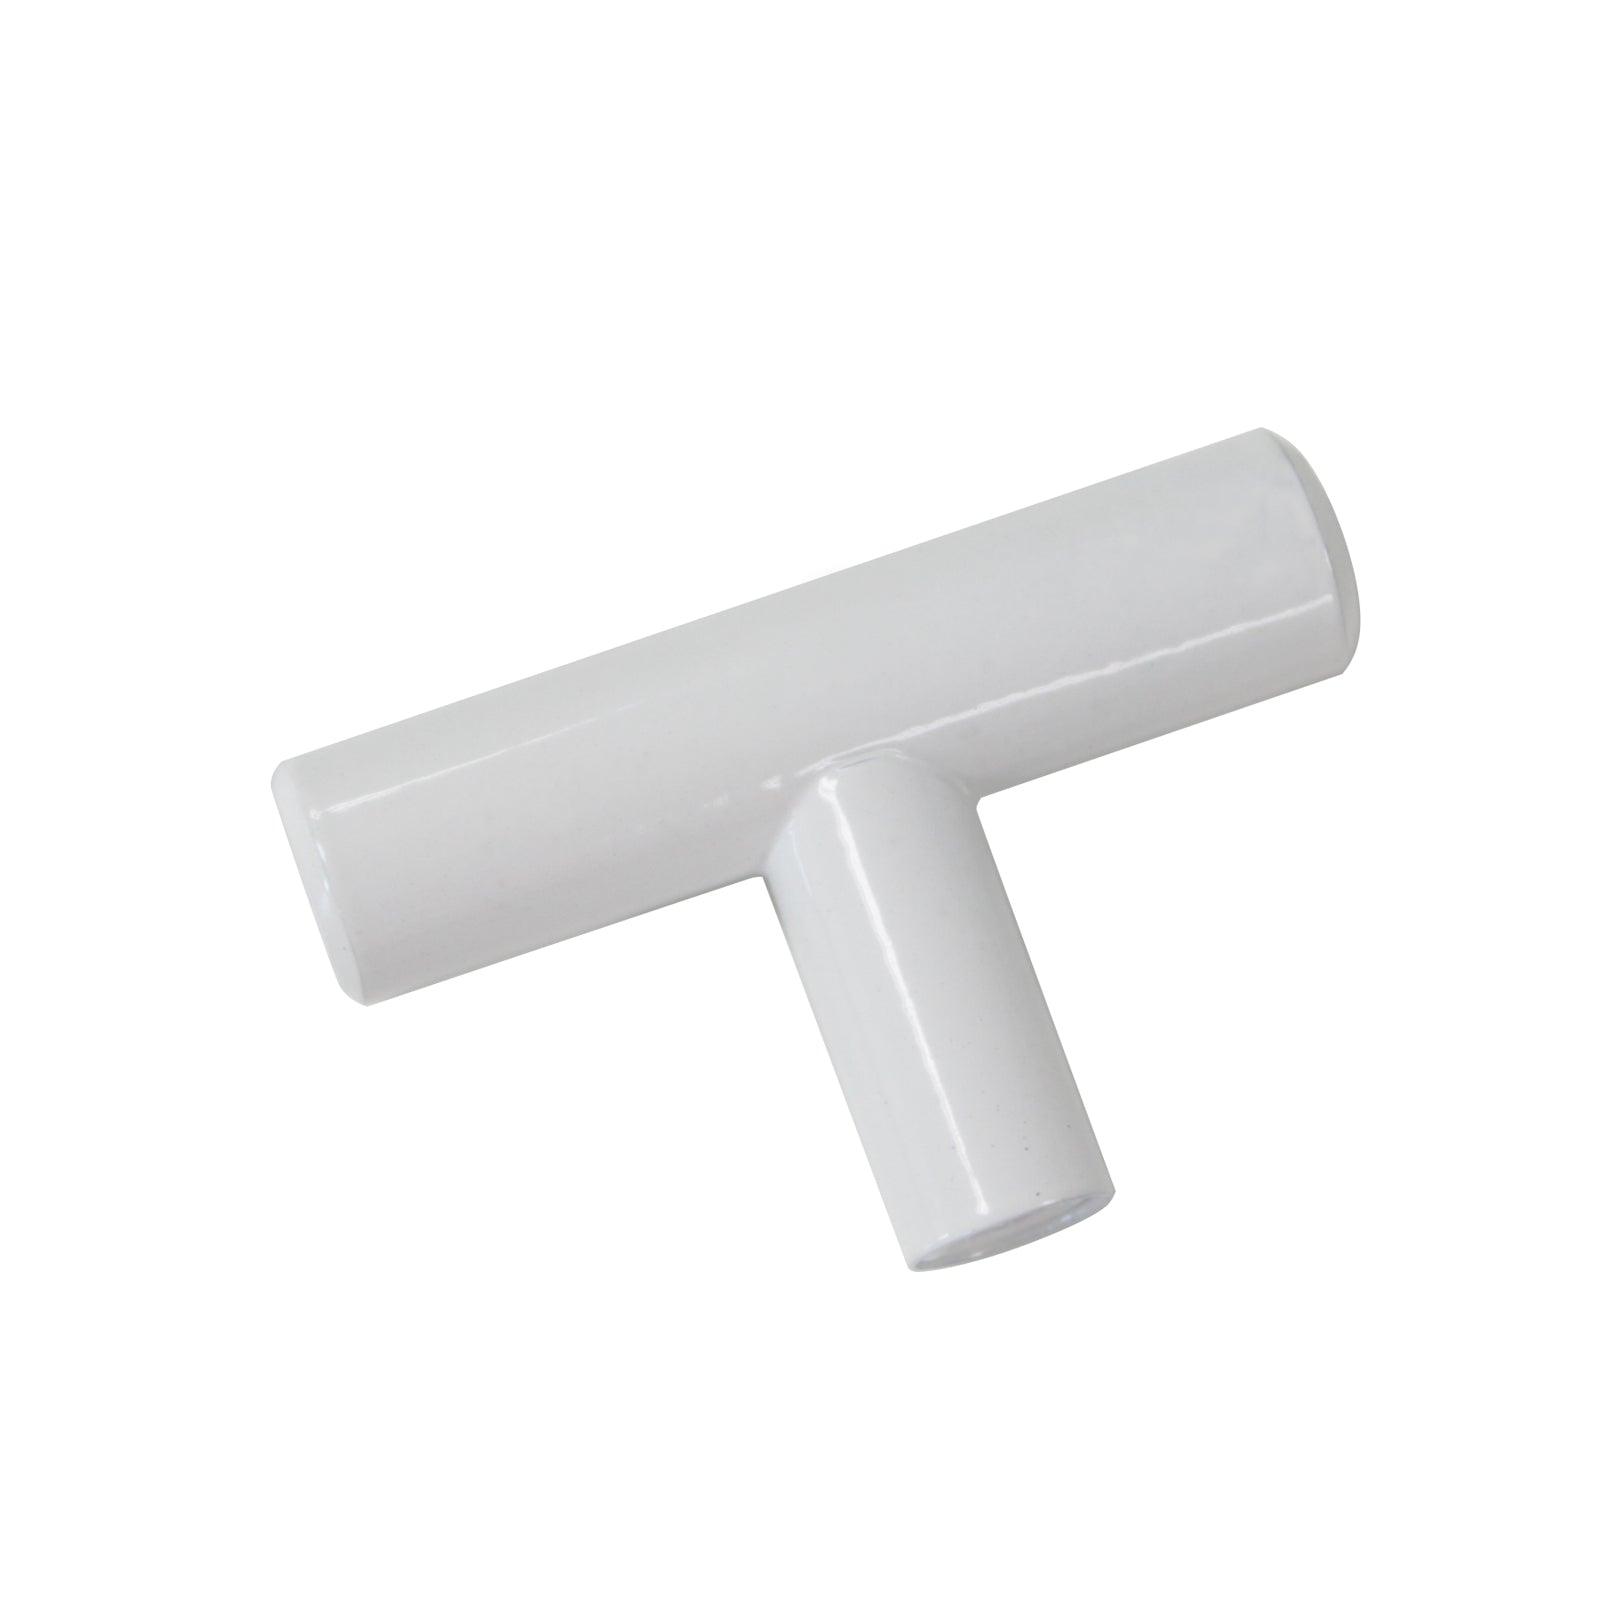 2"-10" Modern Cabinet Hardware Handle Pull Kitchen Cabinet T Bar Knobs and Pull Handles White PD2283HWH